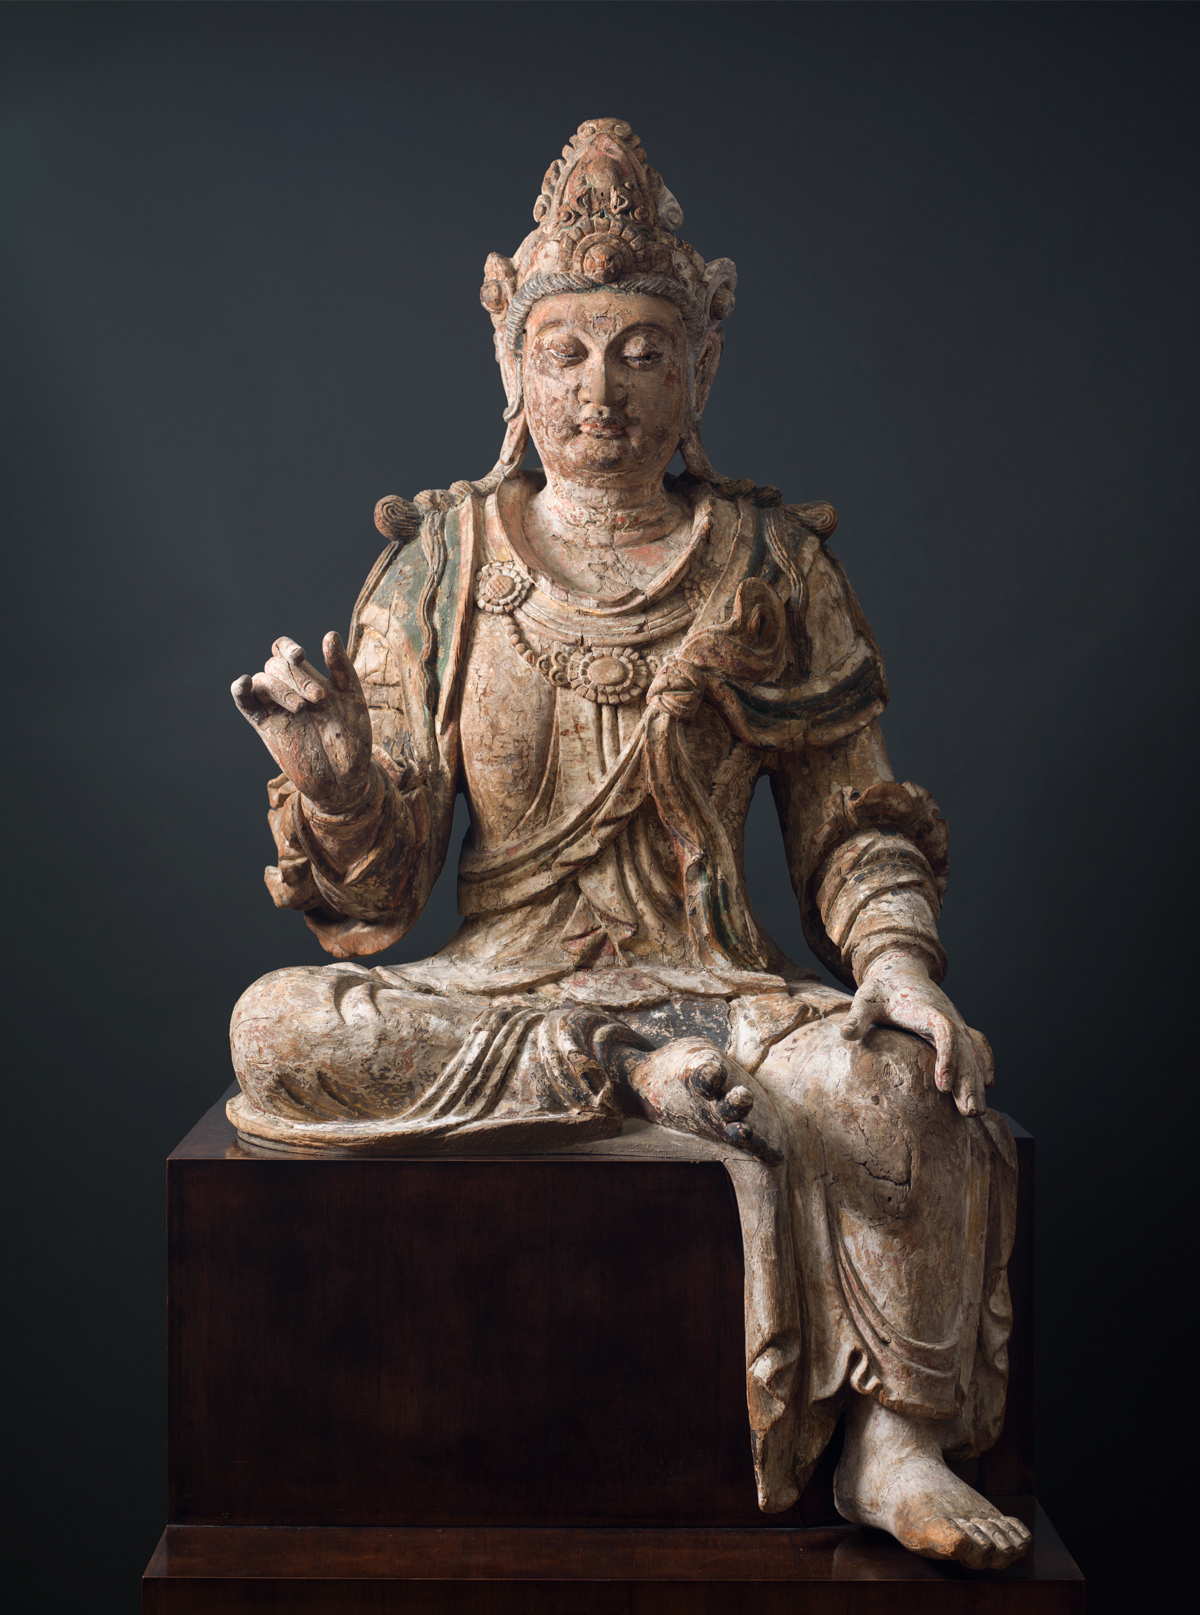 Browse past & current exhibitions of ancient Chinese art by Eskenazi ...